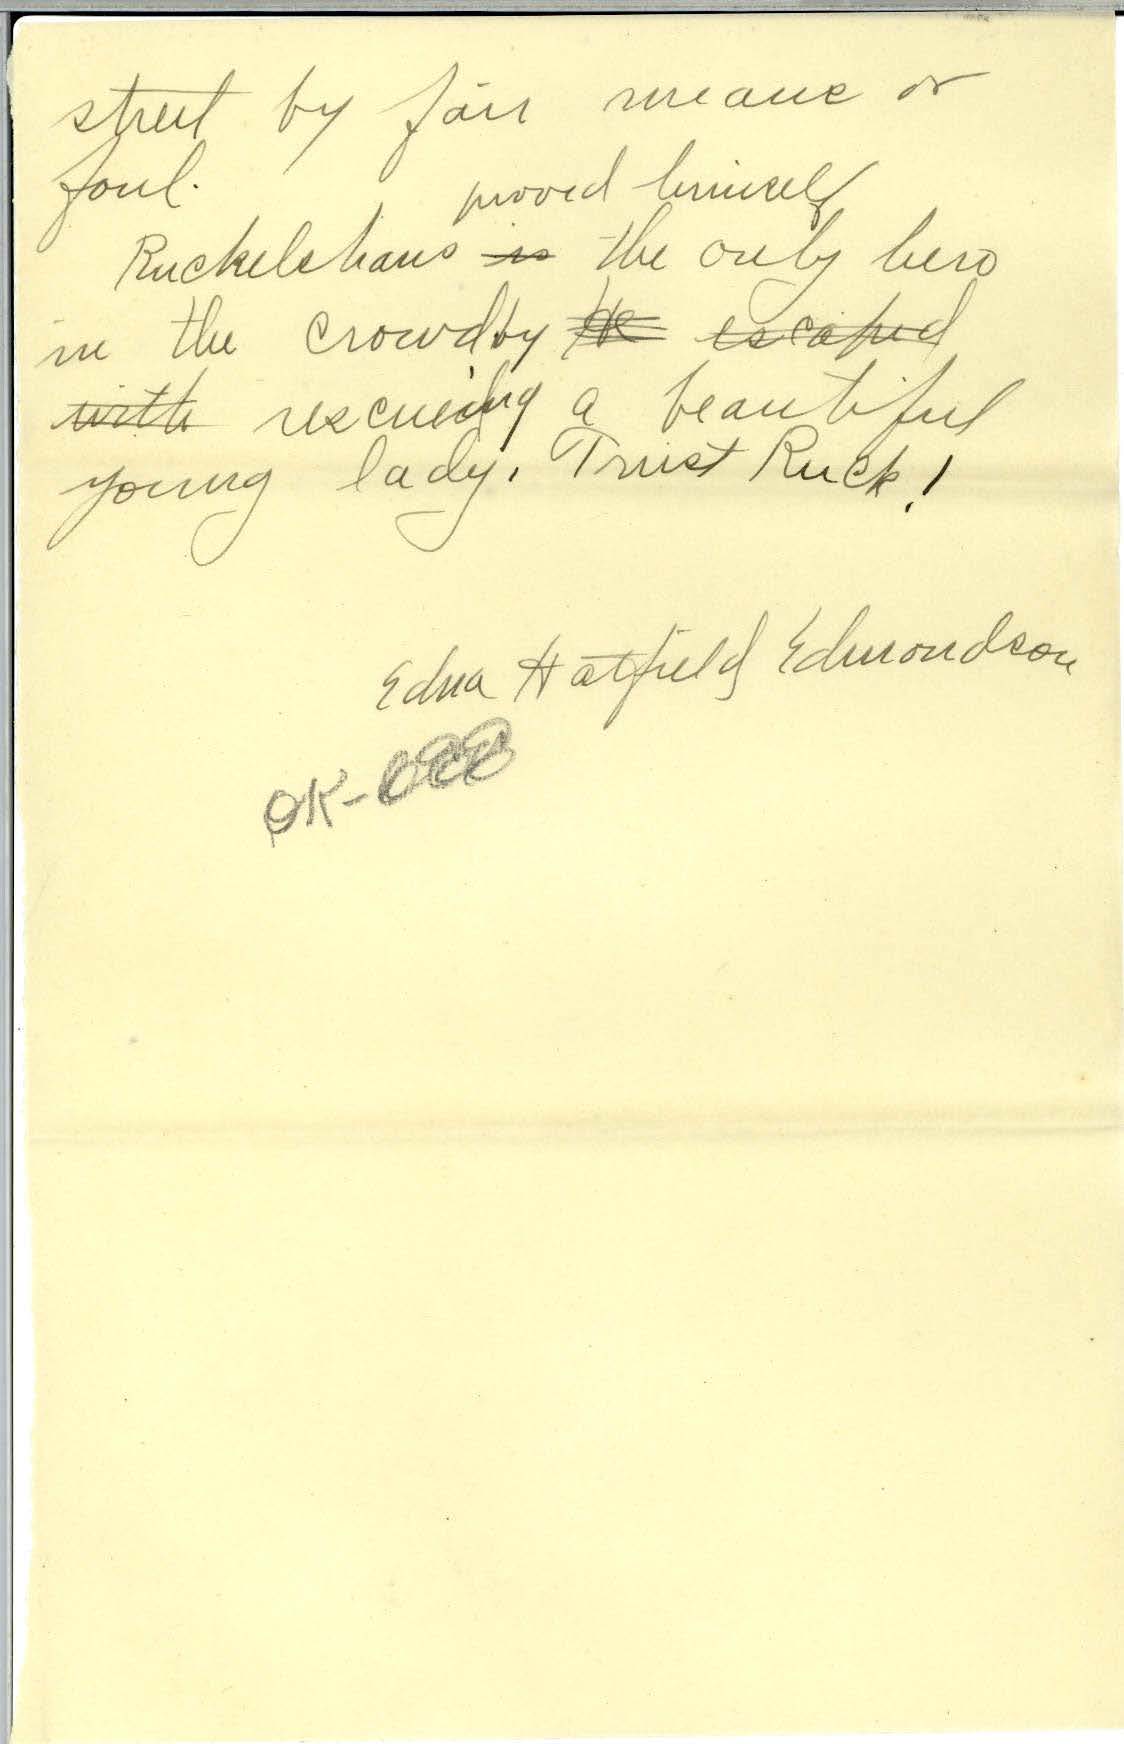 Scan of page 4 of Edna Hatfield's April 30, 1922 letter to Frank R. Elliot - written in cursive handwriting. 